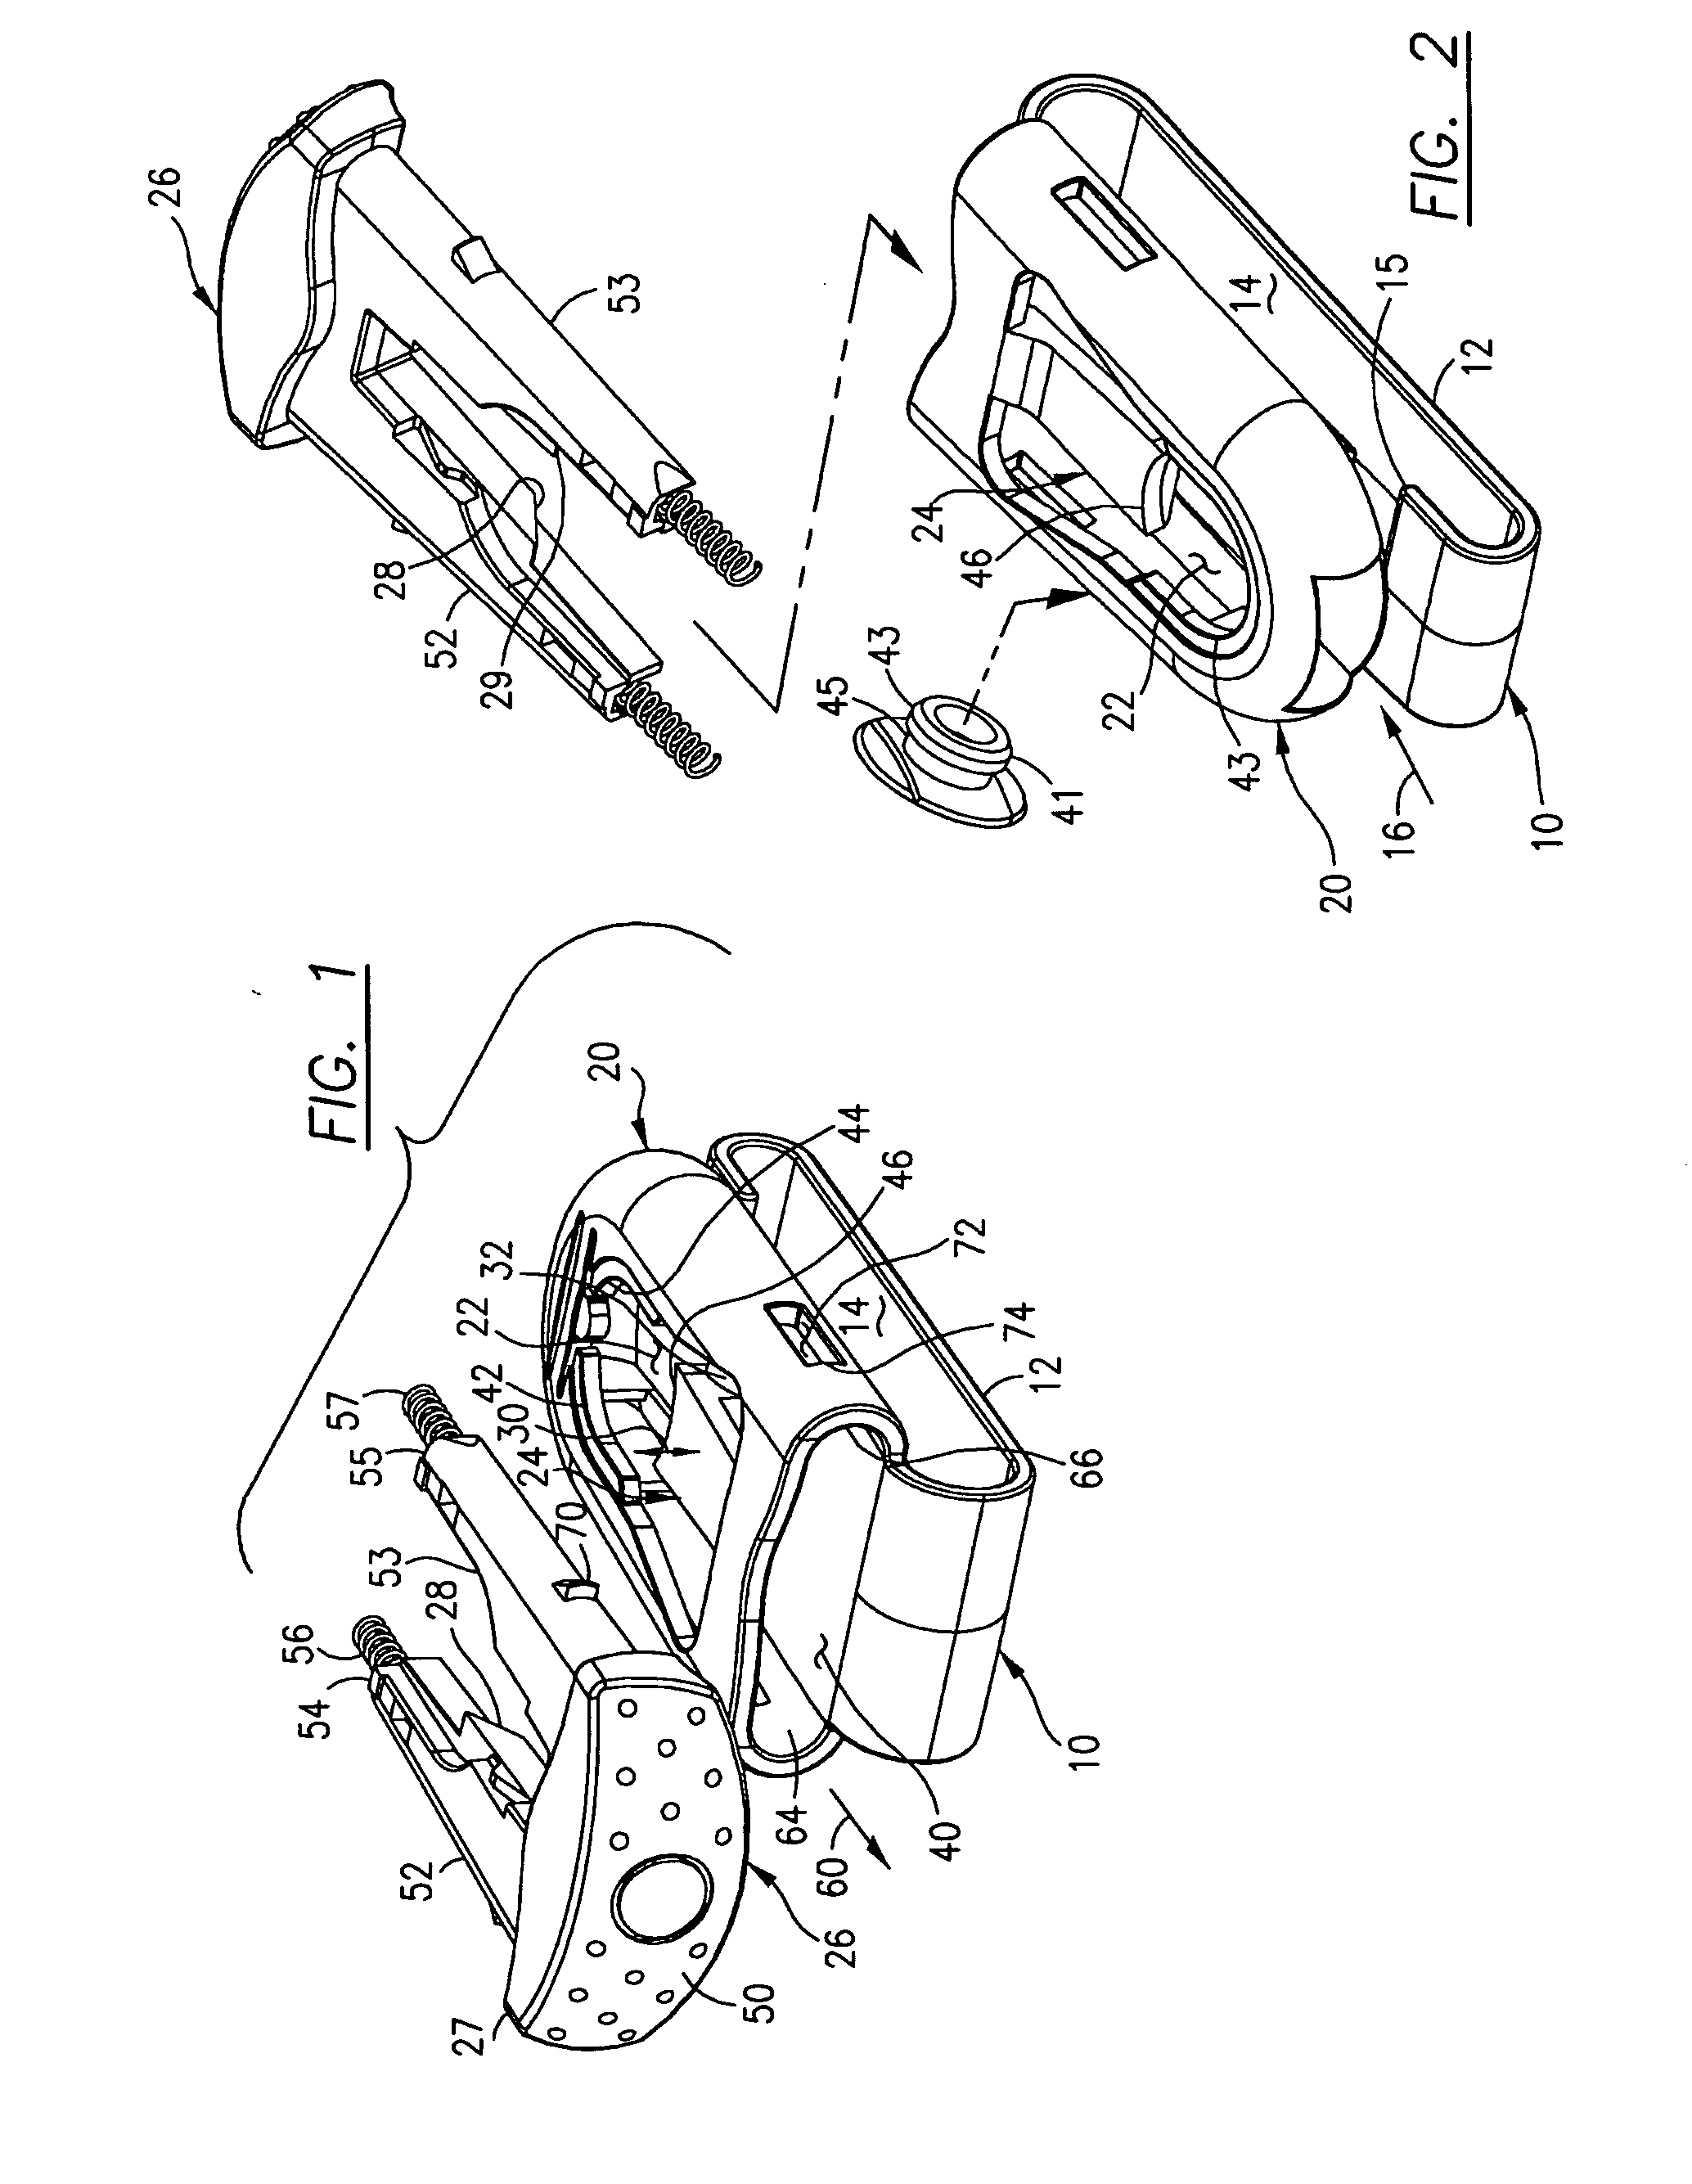 Plastic mount system for cellular phone or personal electronic device attachment